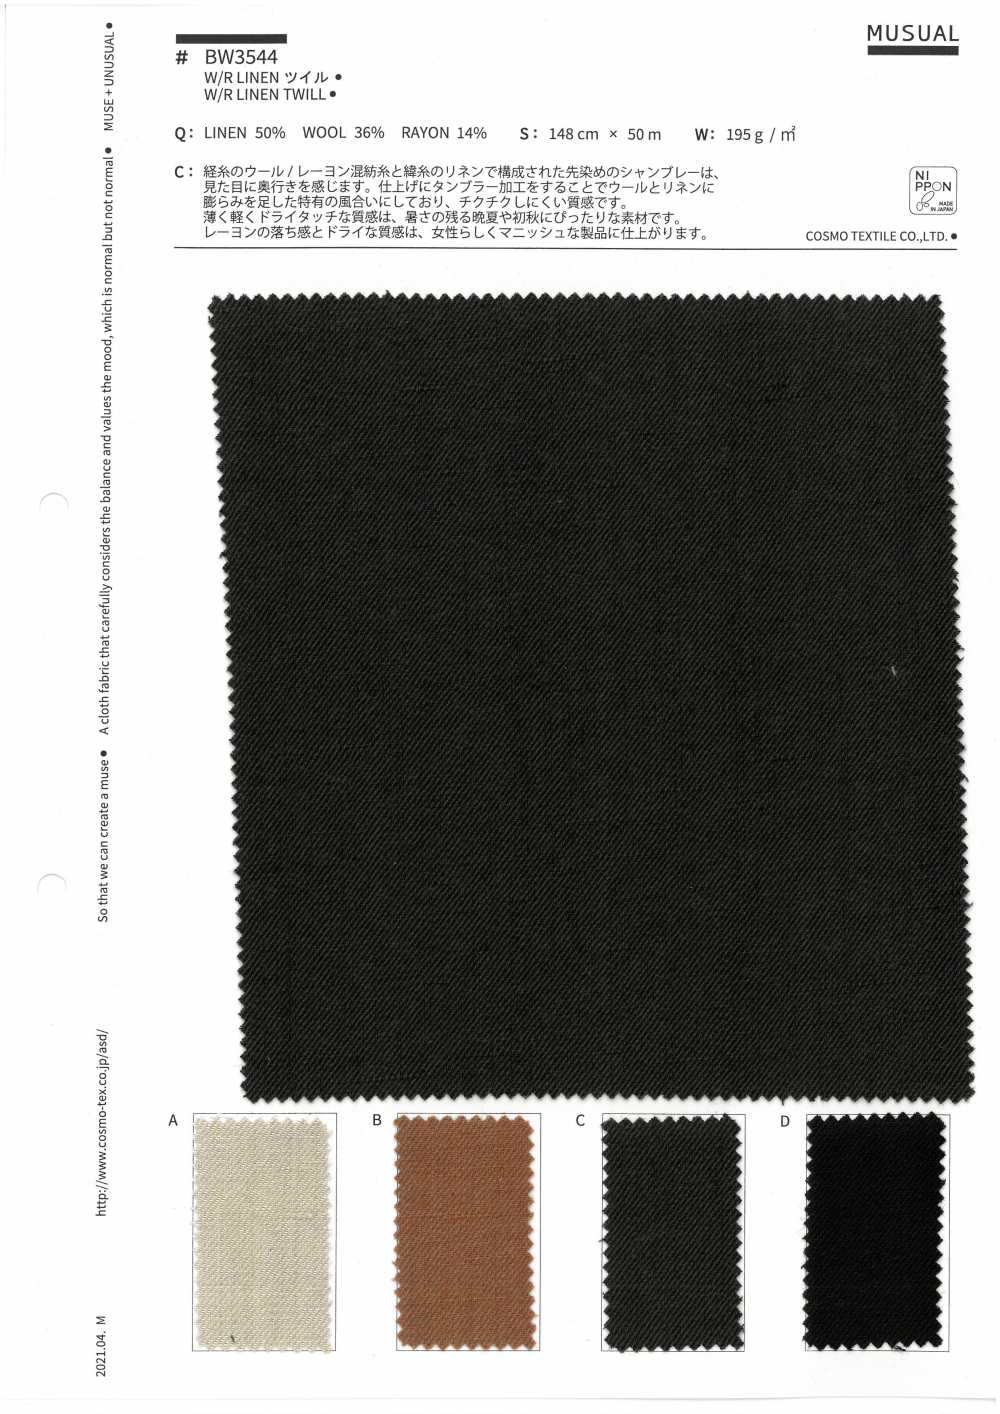 BW3544 [OUTLET] W / R LINEN Twill[Fabrica Textil] COSMO TEXTILE